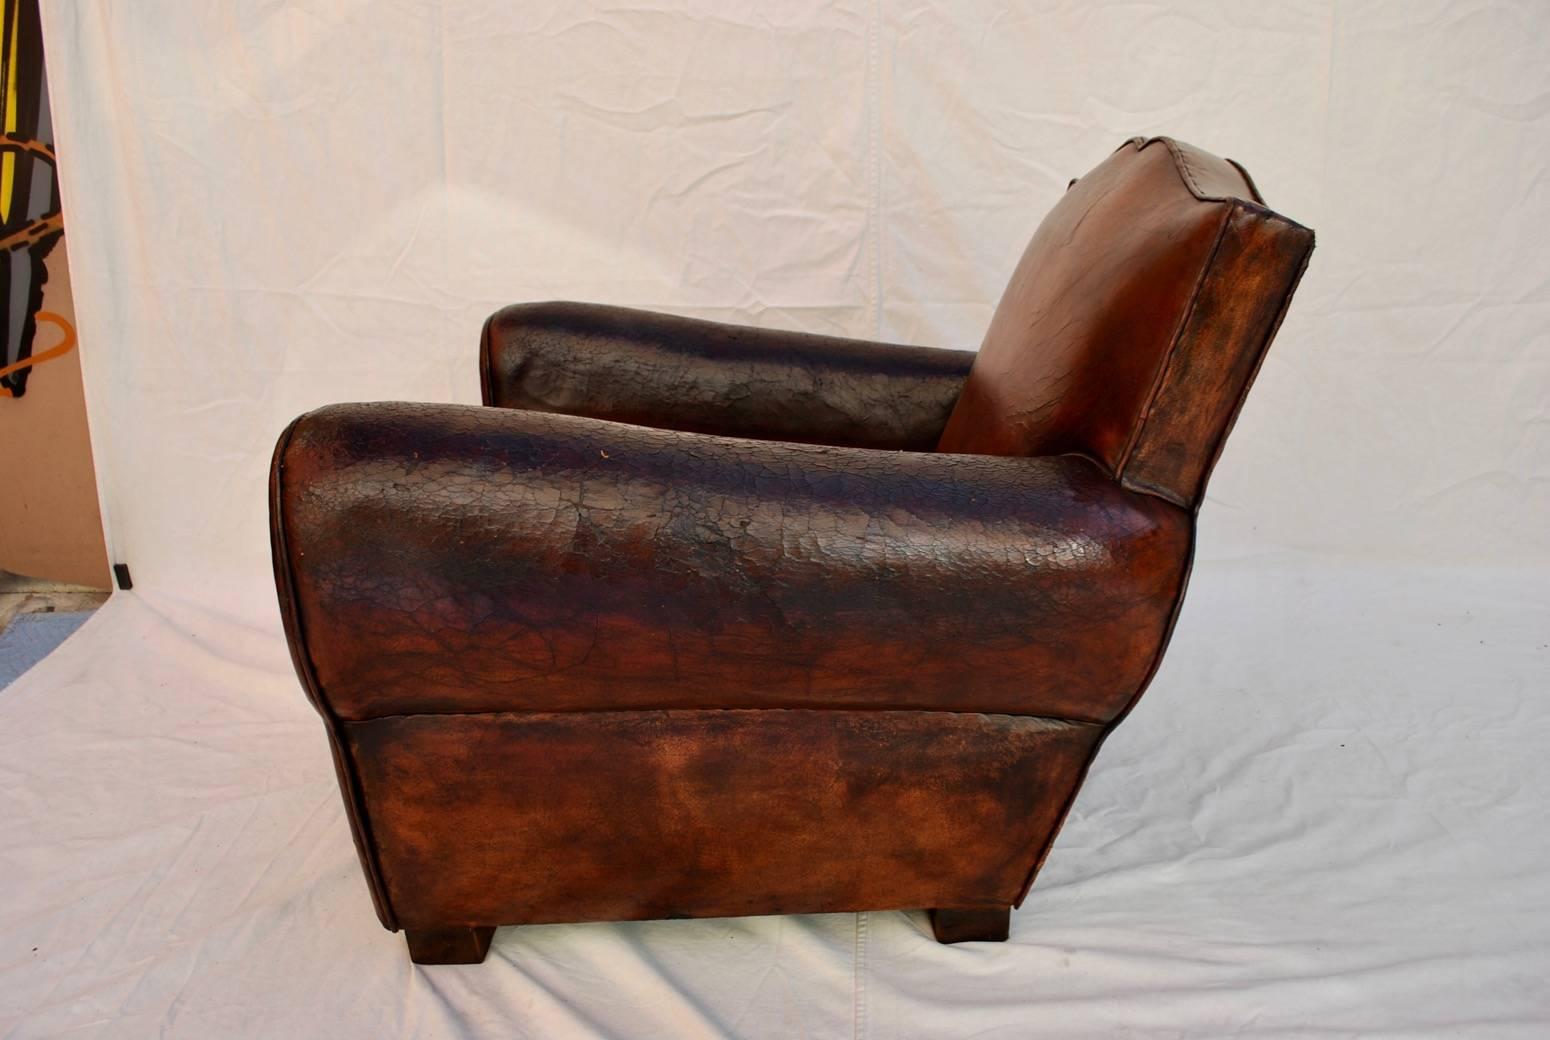 A beautiful French club chair, the patina is so much nicer in person, price is firm.